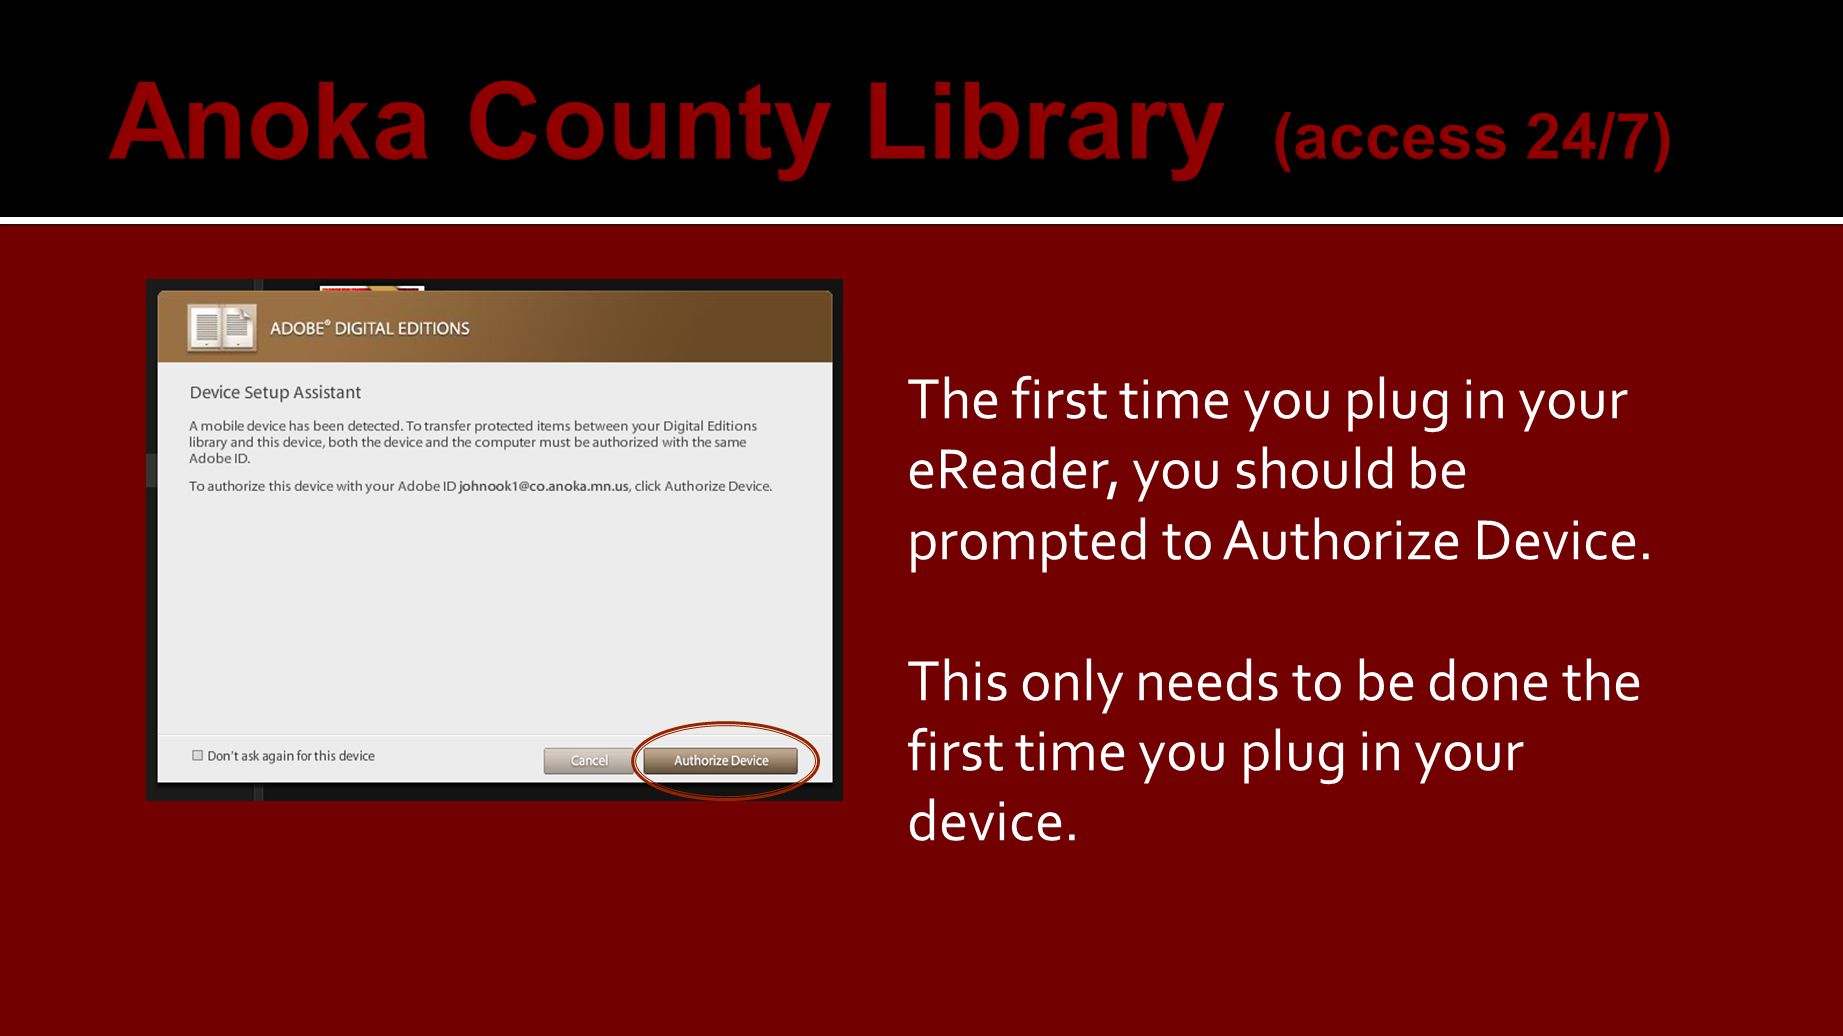 The first time you plug in your eReader, you should be prompted to Authorize Device.